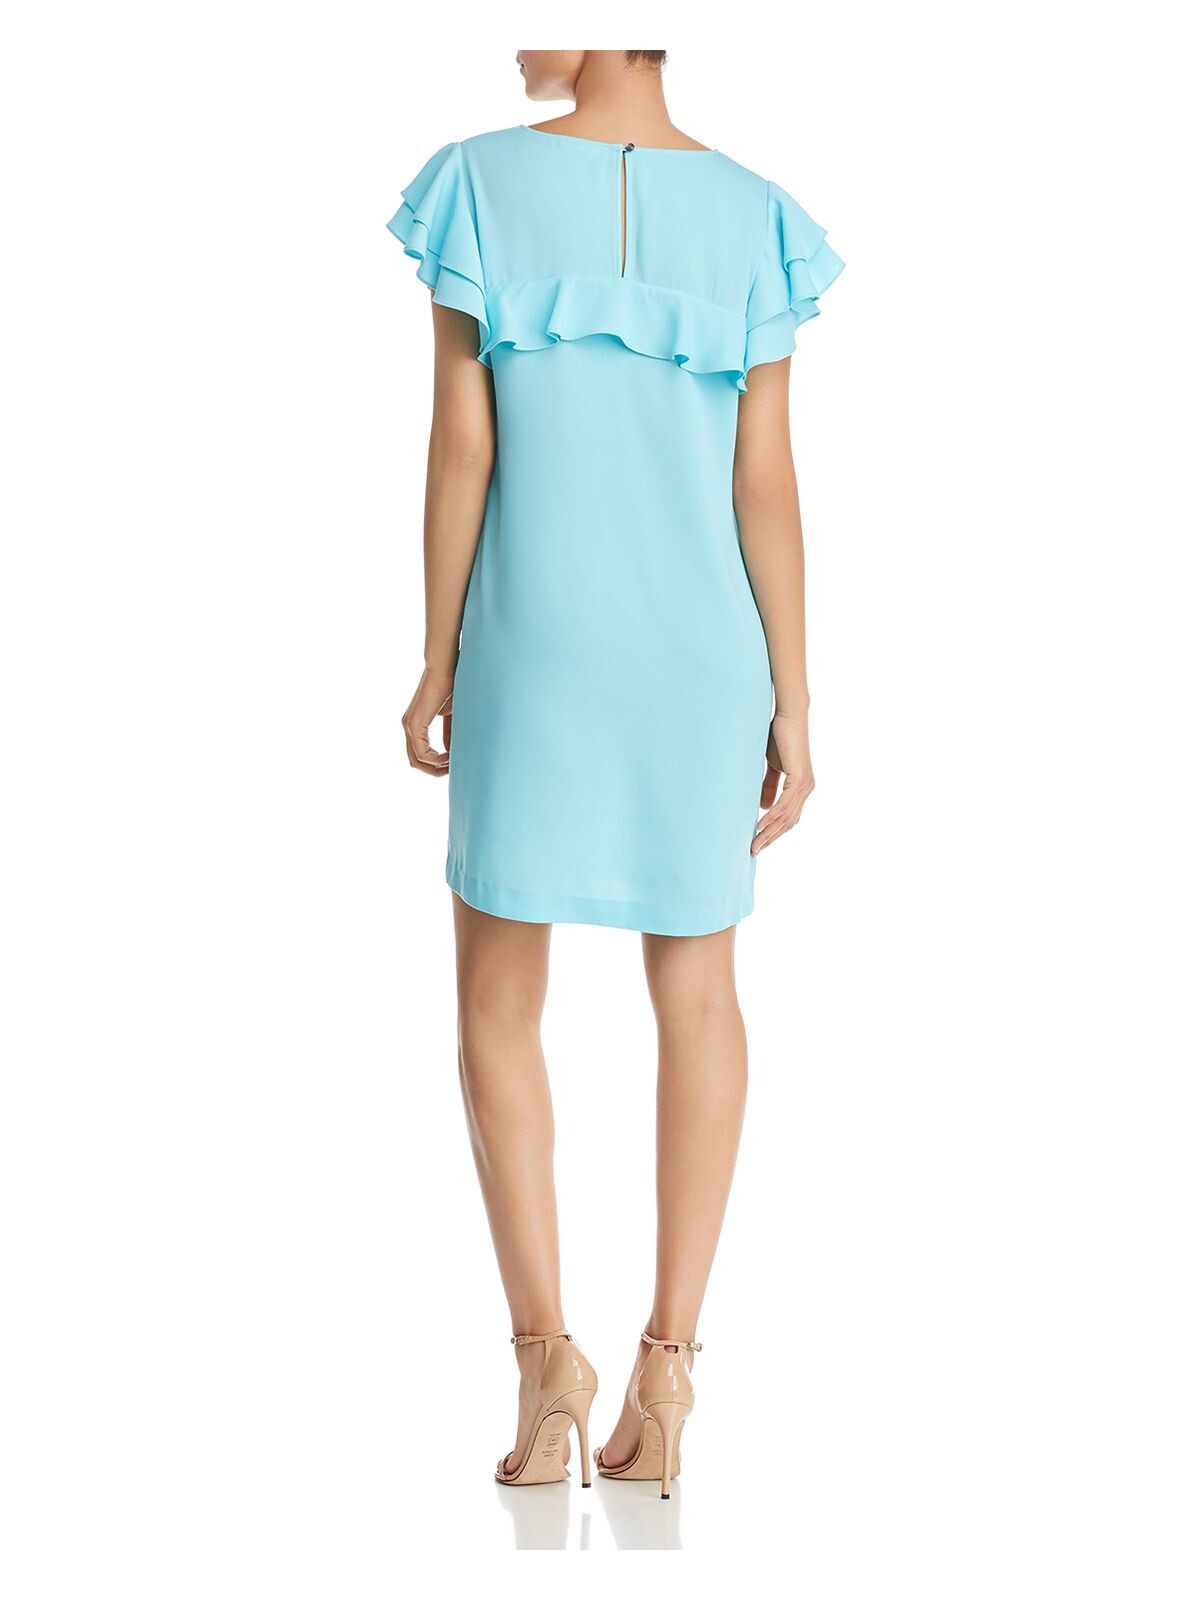 LE GALI Womens Turquoise Ruffled  Sleeves Short Sleeve Jewel Neck Short Cocktail Body Con Dress L